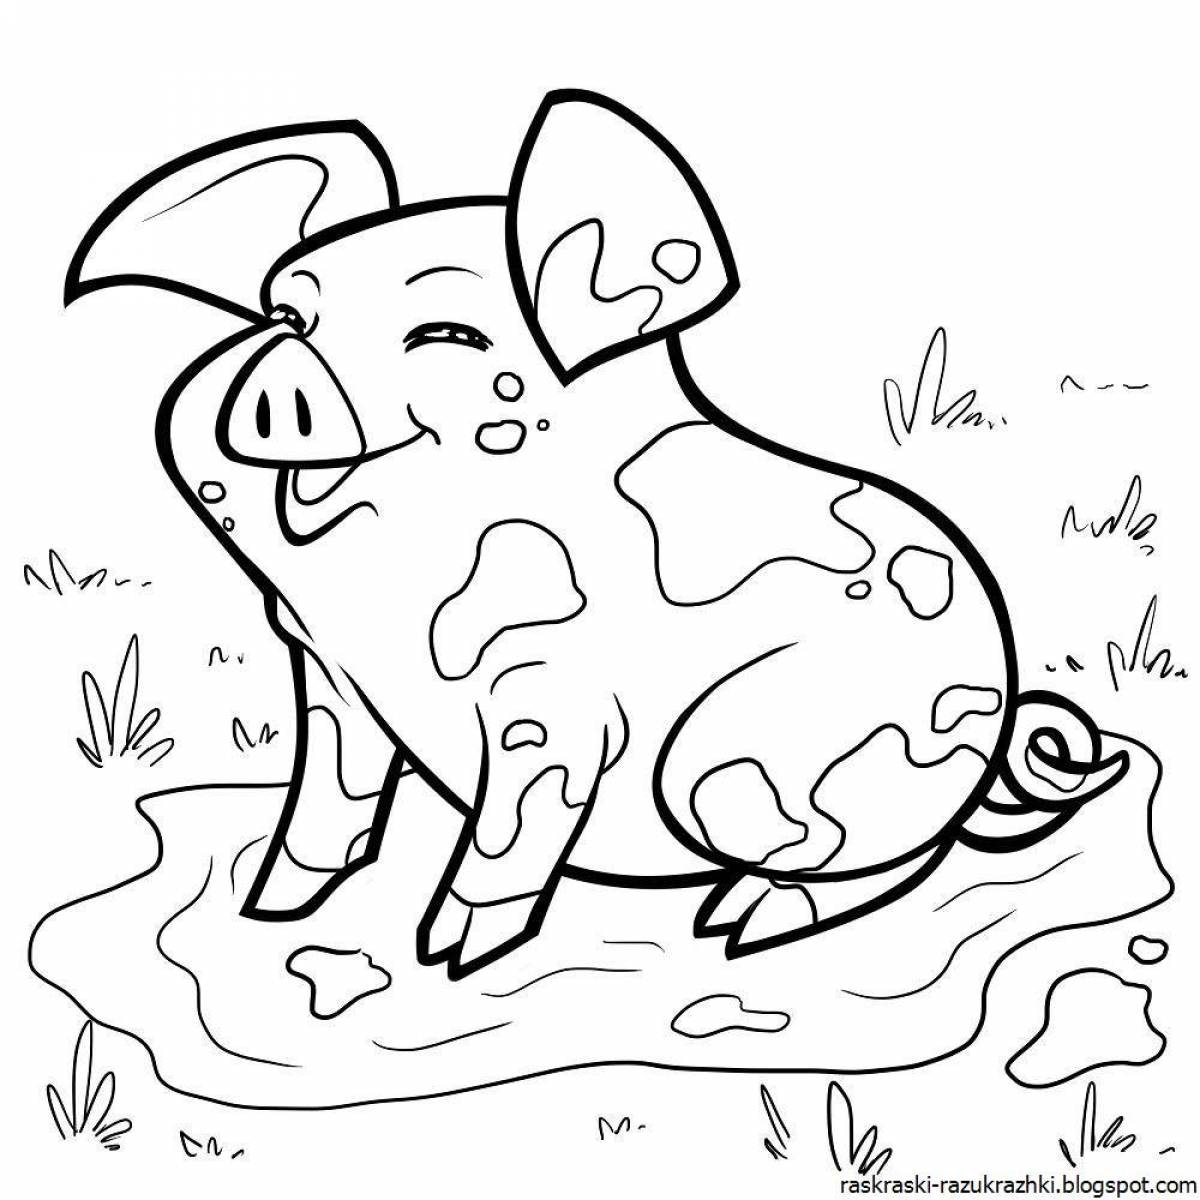 Coloring page excited pig